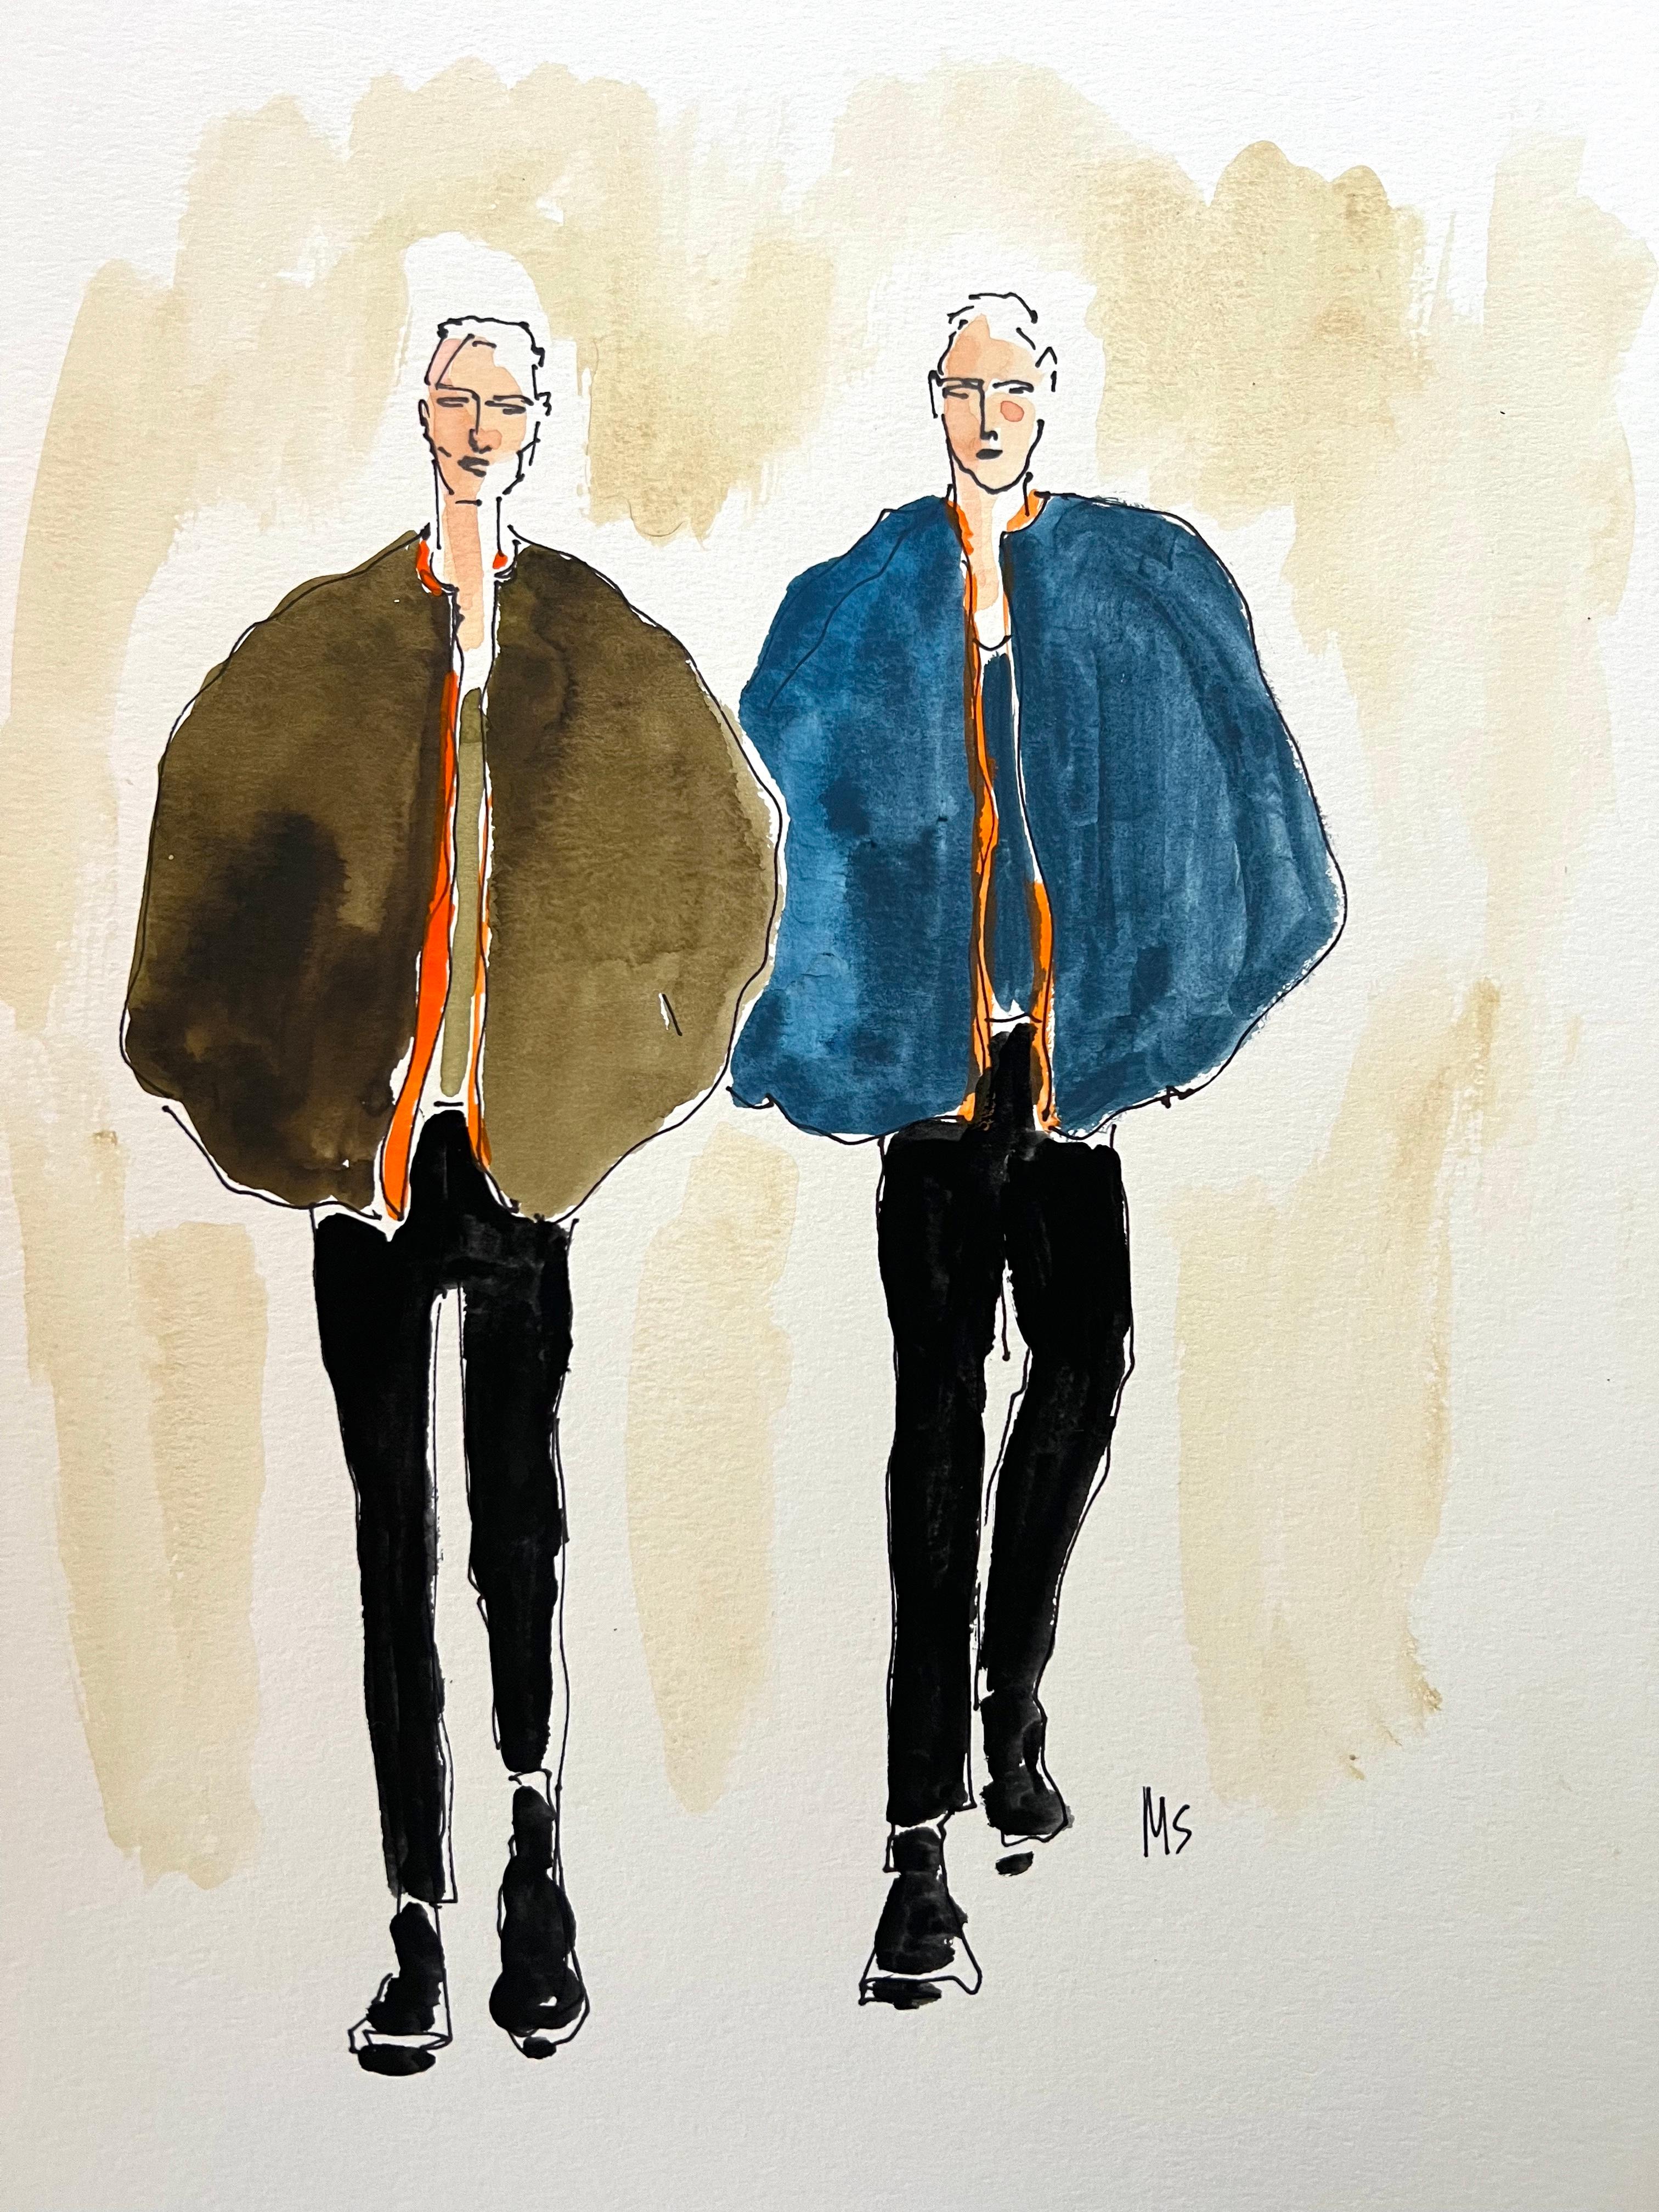 Manuel Santelices Figurative Art - Prada puffy coats. Watercolor fashion drawing on archival paper